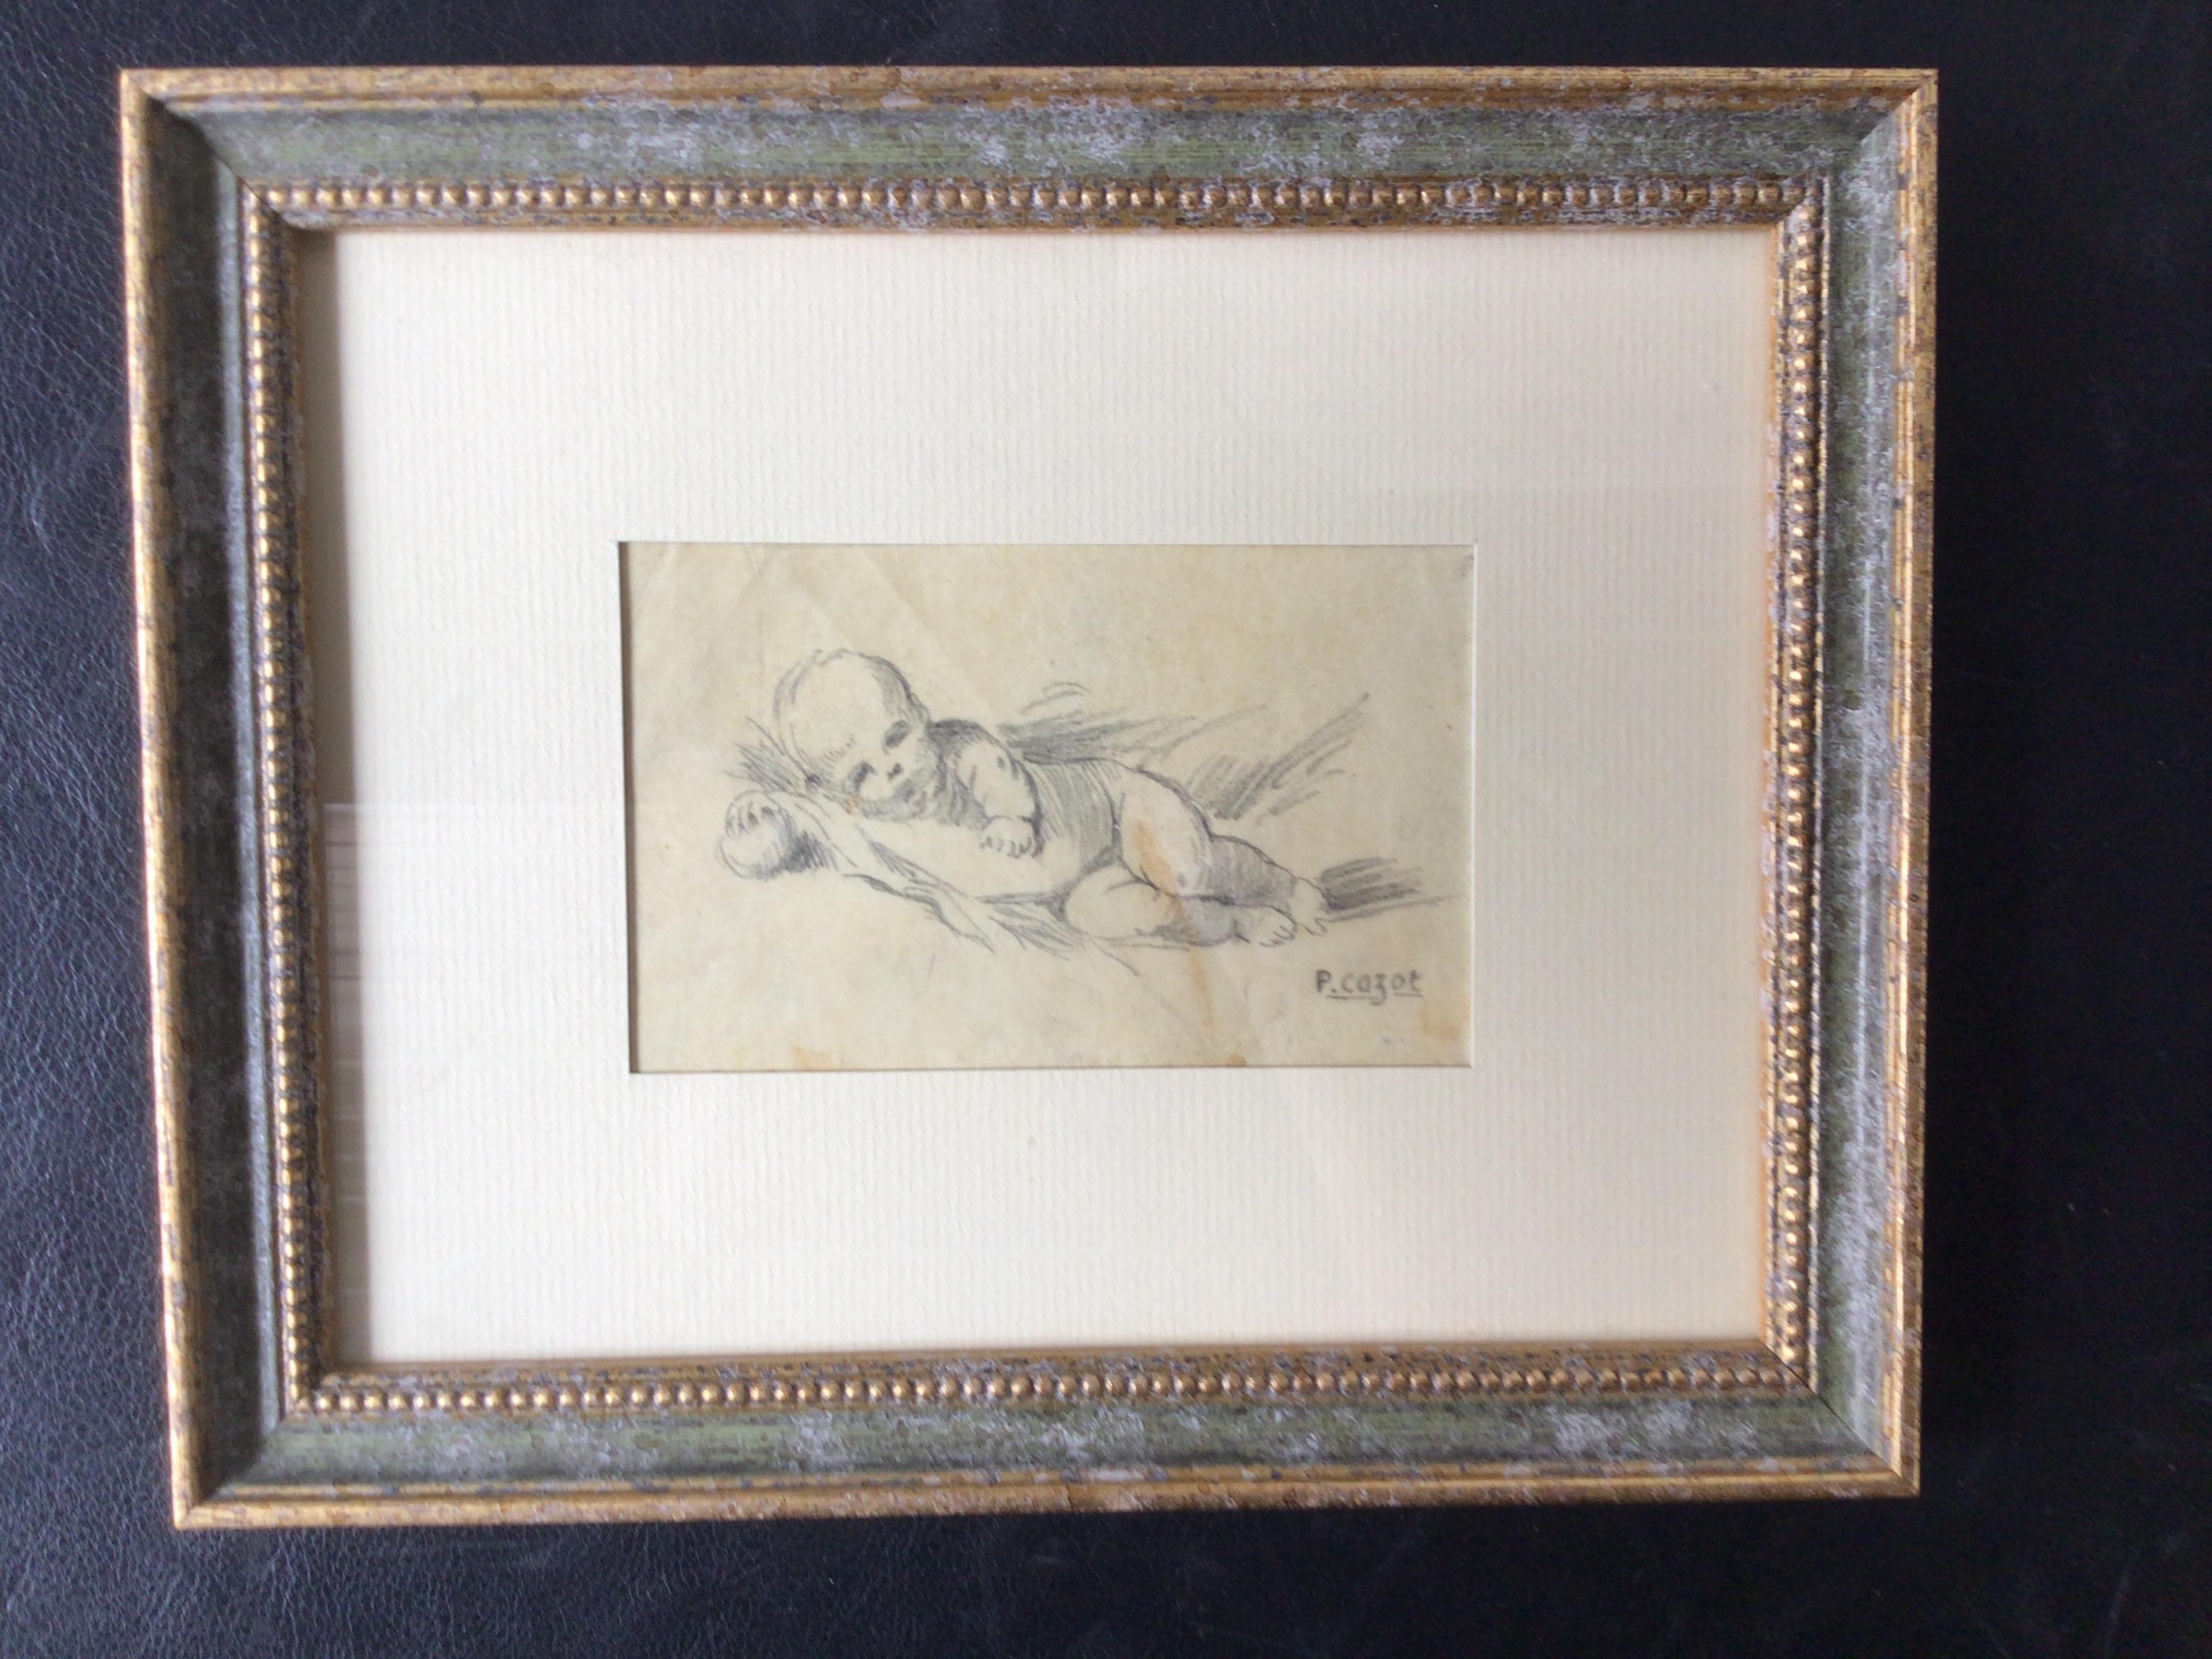 Pair of 1930s drawings if sleeping babies by P. Cazot.